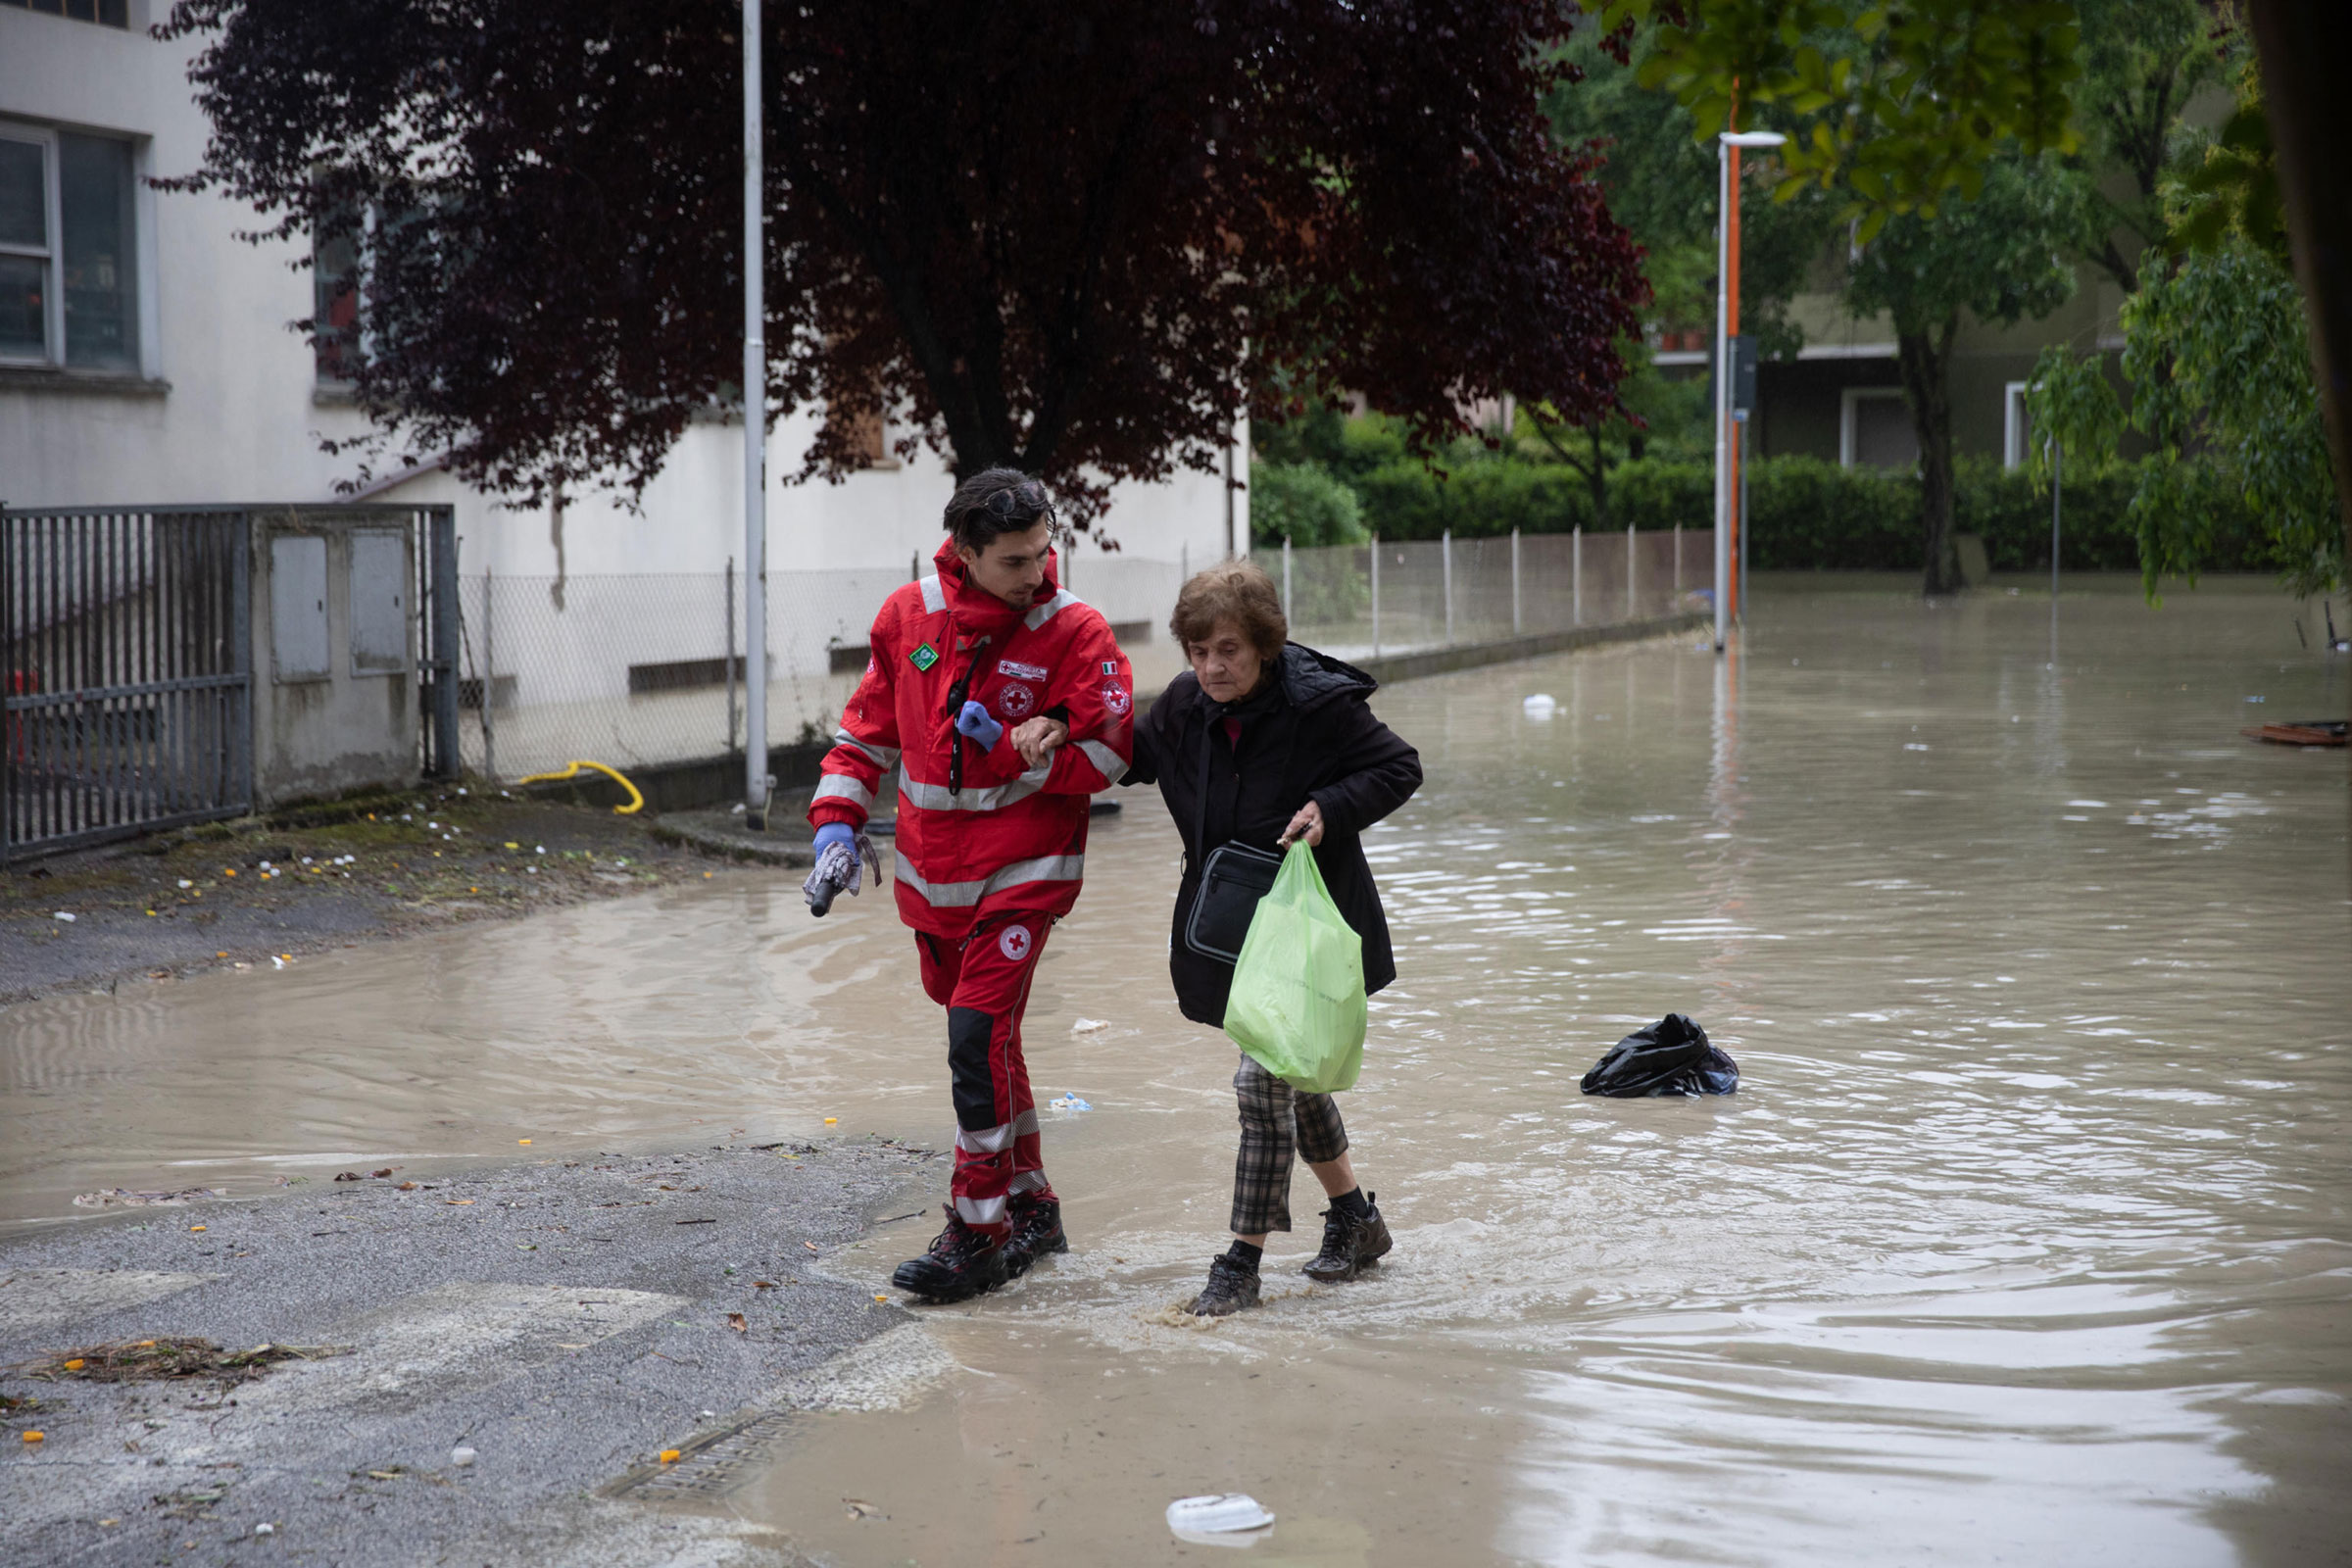 A member of the Italian Red Cross helps a resident evacuate after the flooding of the Savio river, in Cesena, on May 16. (Max Cavallari—EPA-EFE/Shutterstock)